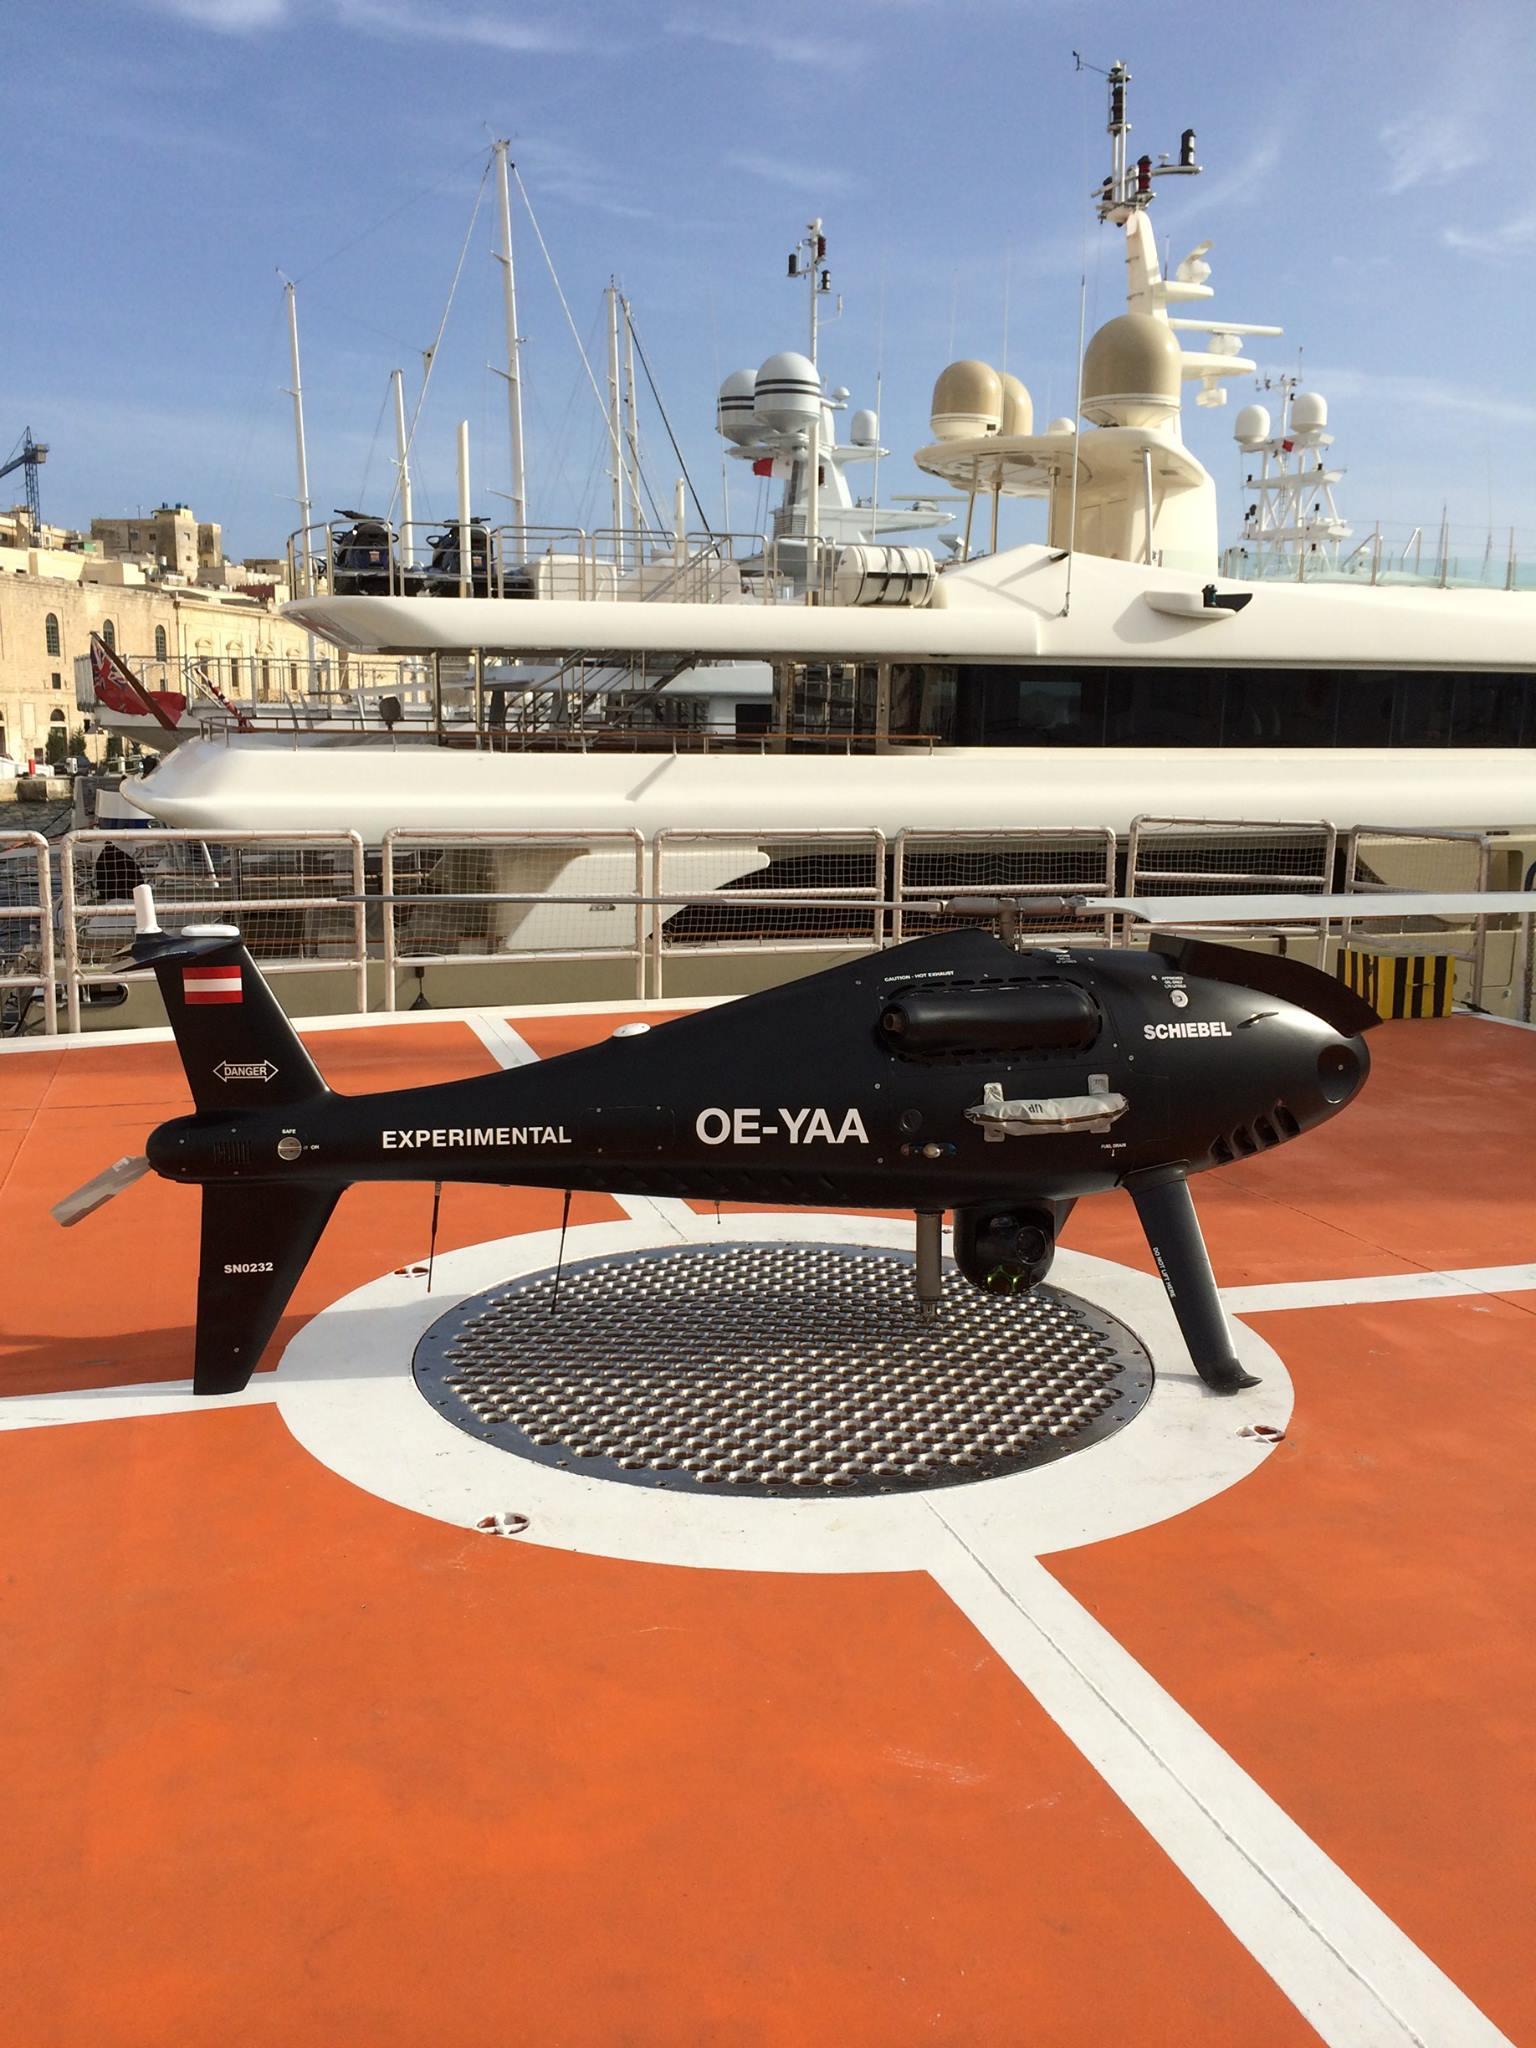 The MOAS rescue ship is equipped with drones.